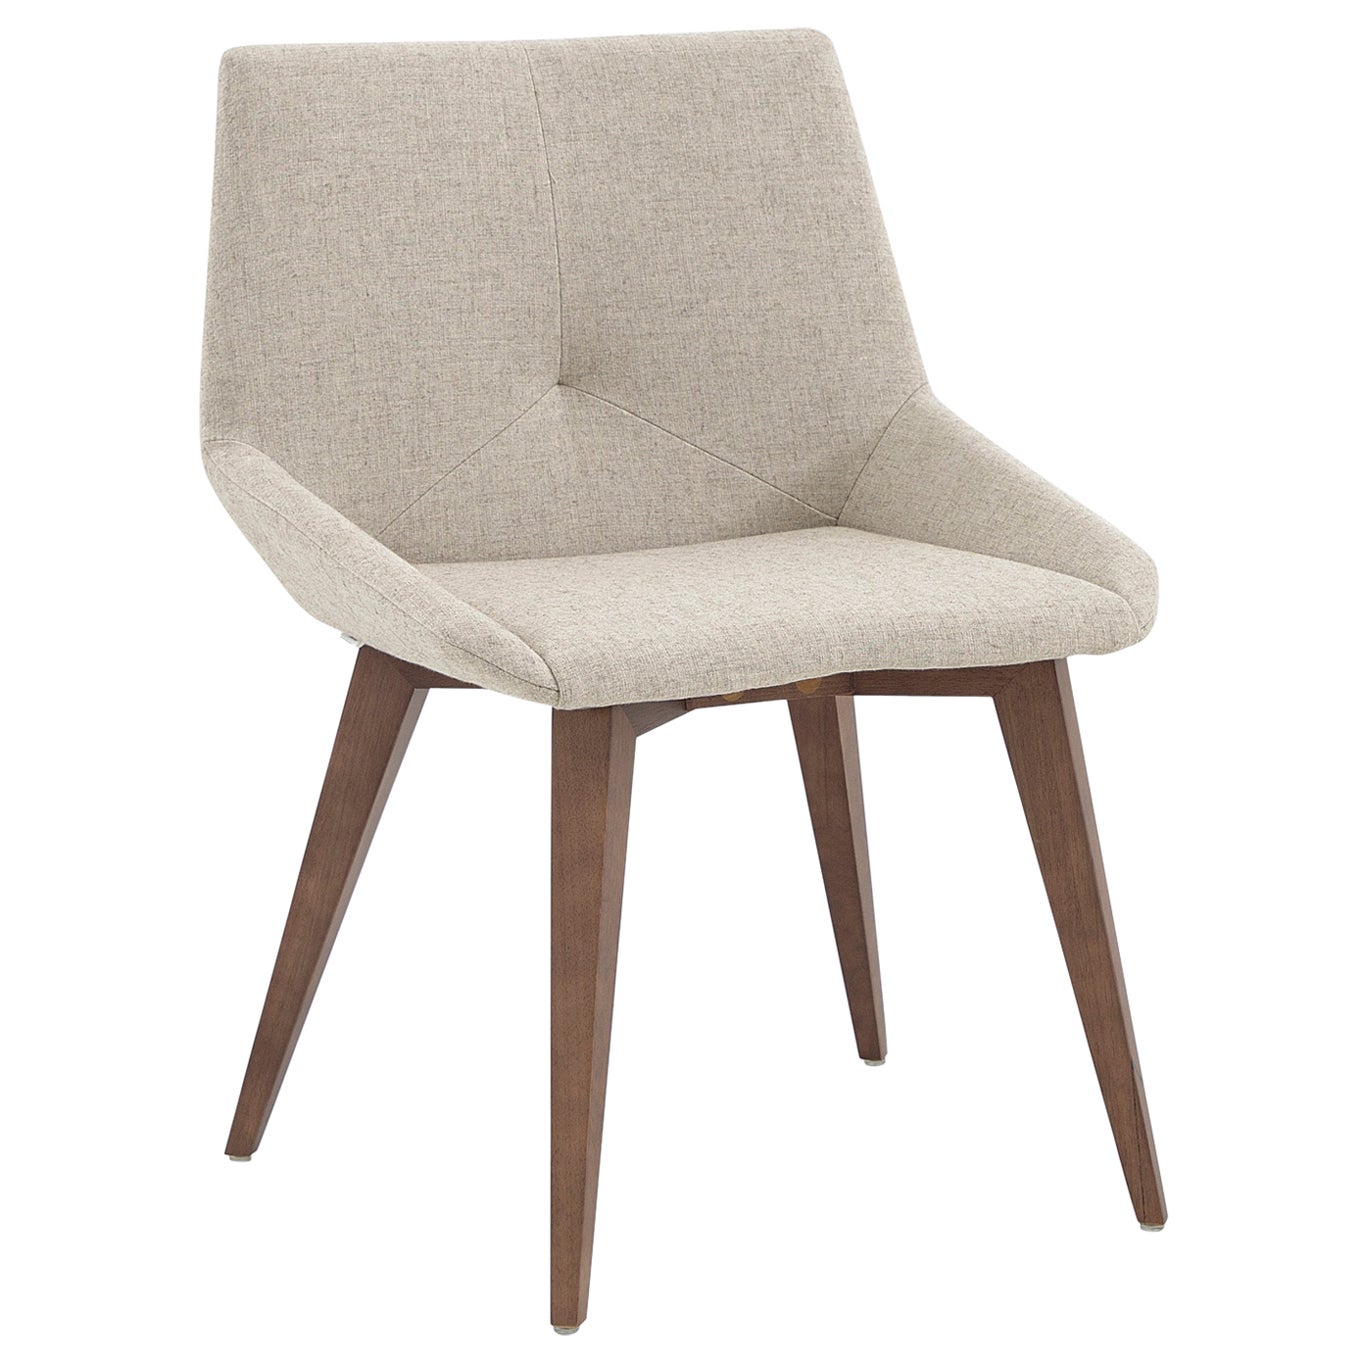 Geometric Cubi Dining Chair with Walnut Wood Finish Base and Ivory Fabric For Sale